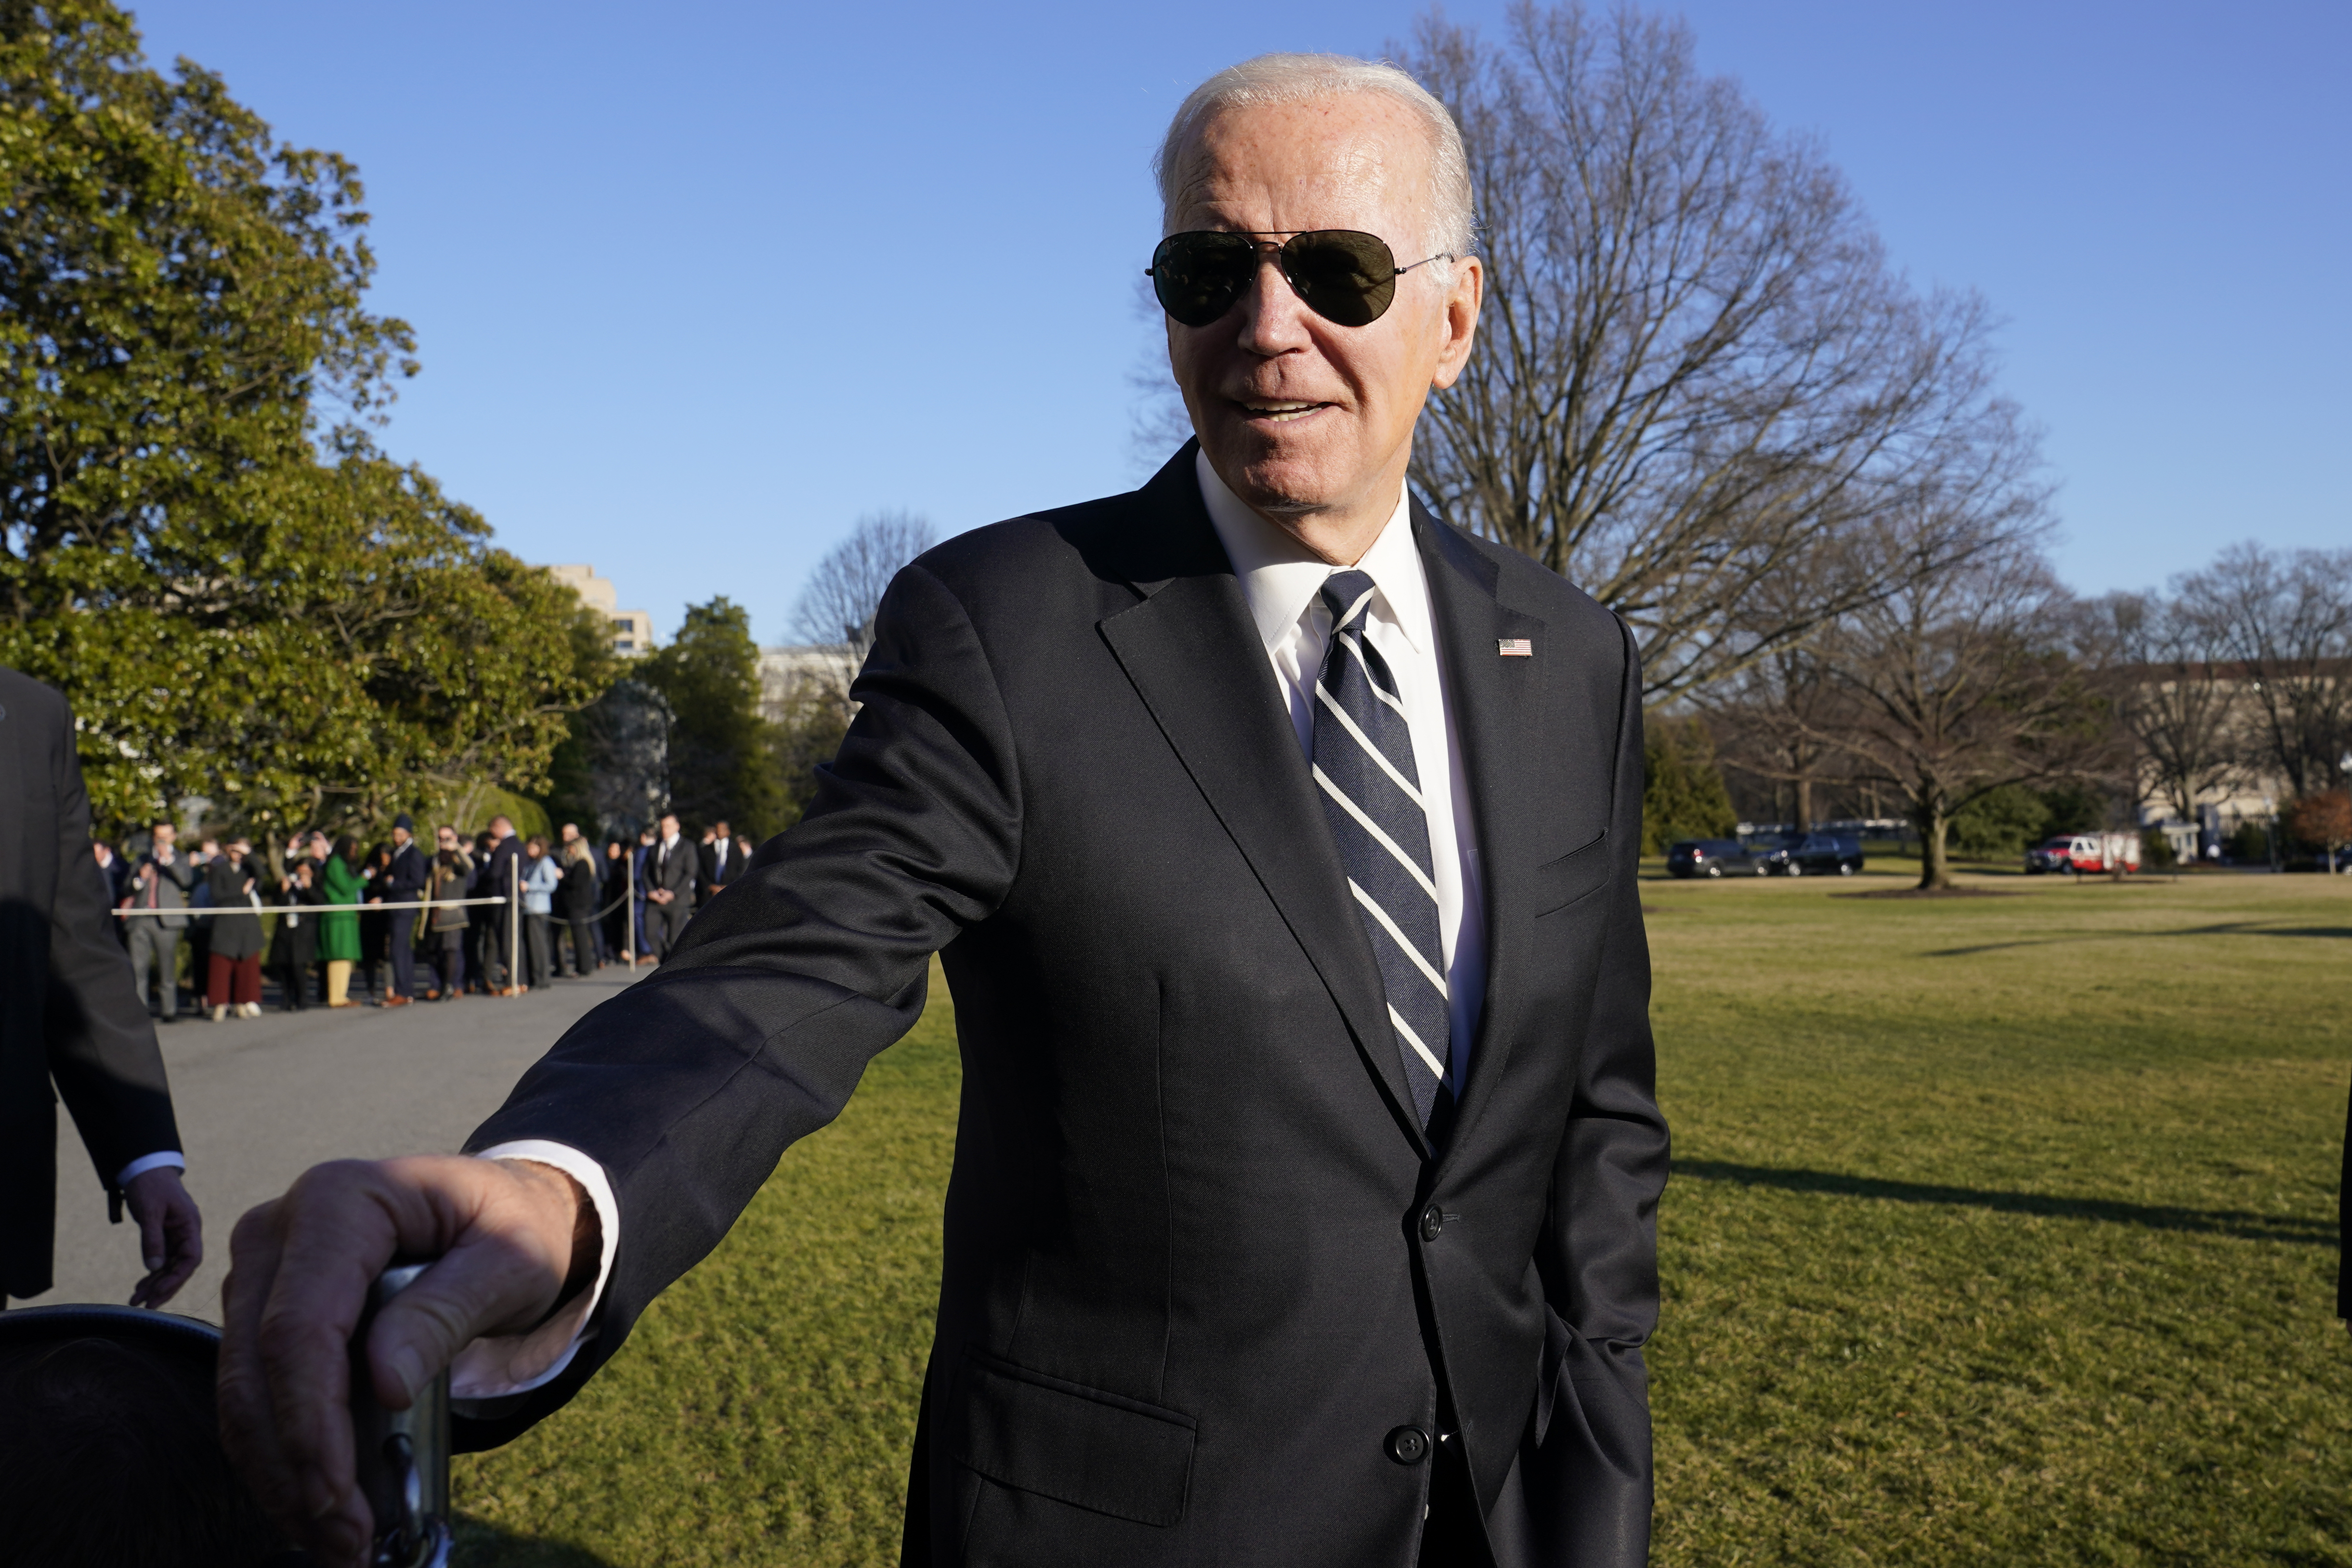 President Joe Biden talks with reporters on the South Lawn of the White House Monday, Jan. 30, 2023, in Washington, after returning from an event in Baltimore on infrastructure.  (AP Photo/Susan Walsh)